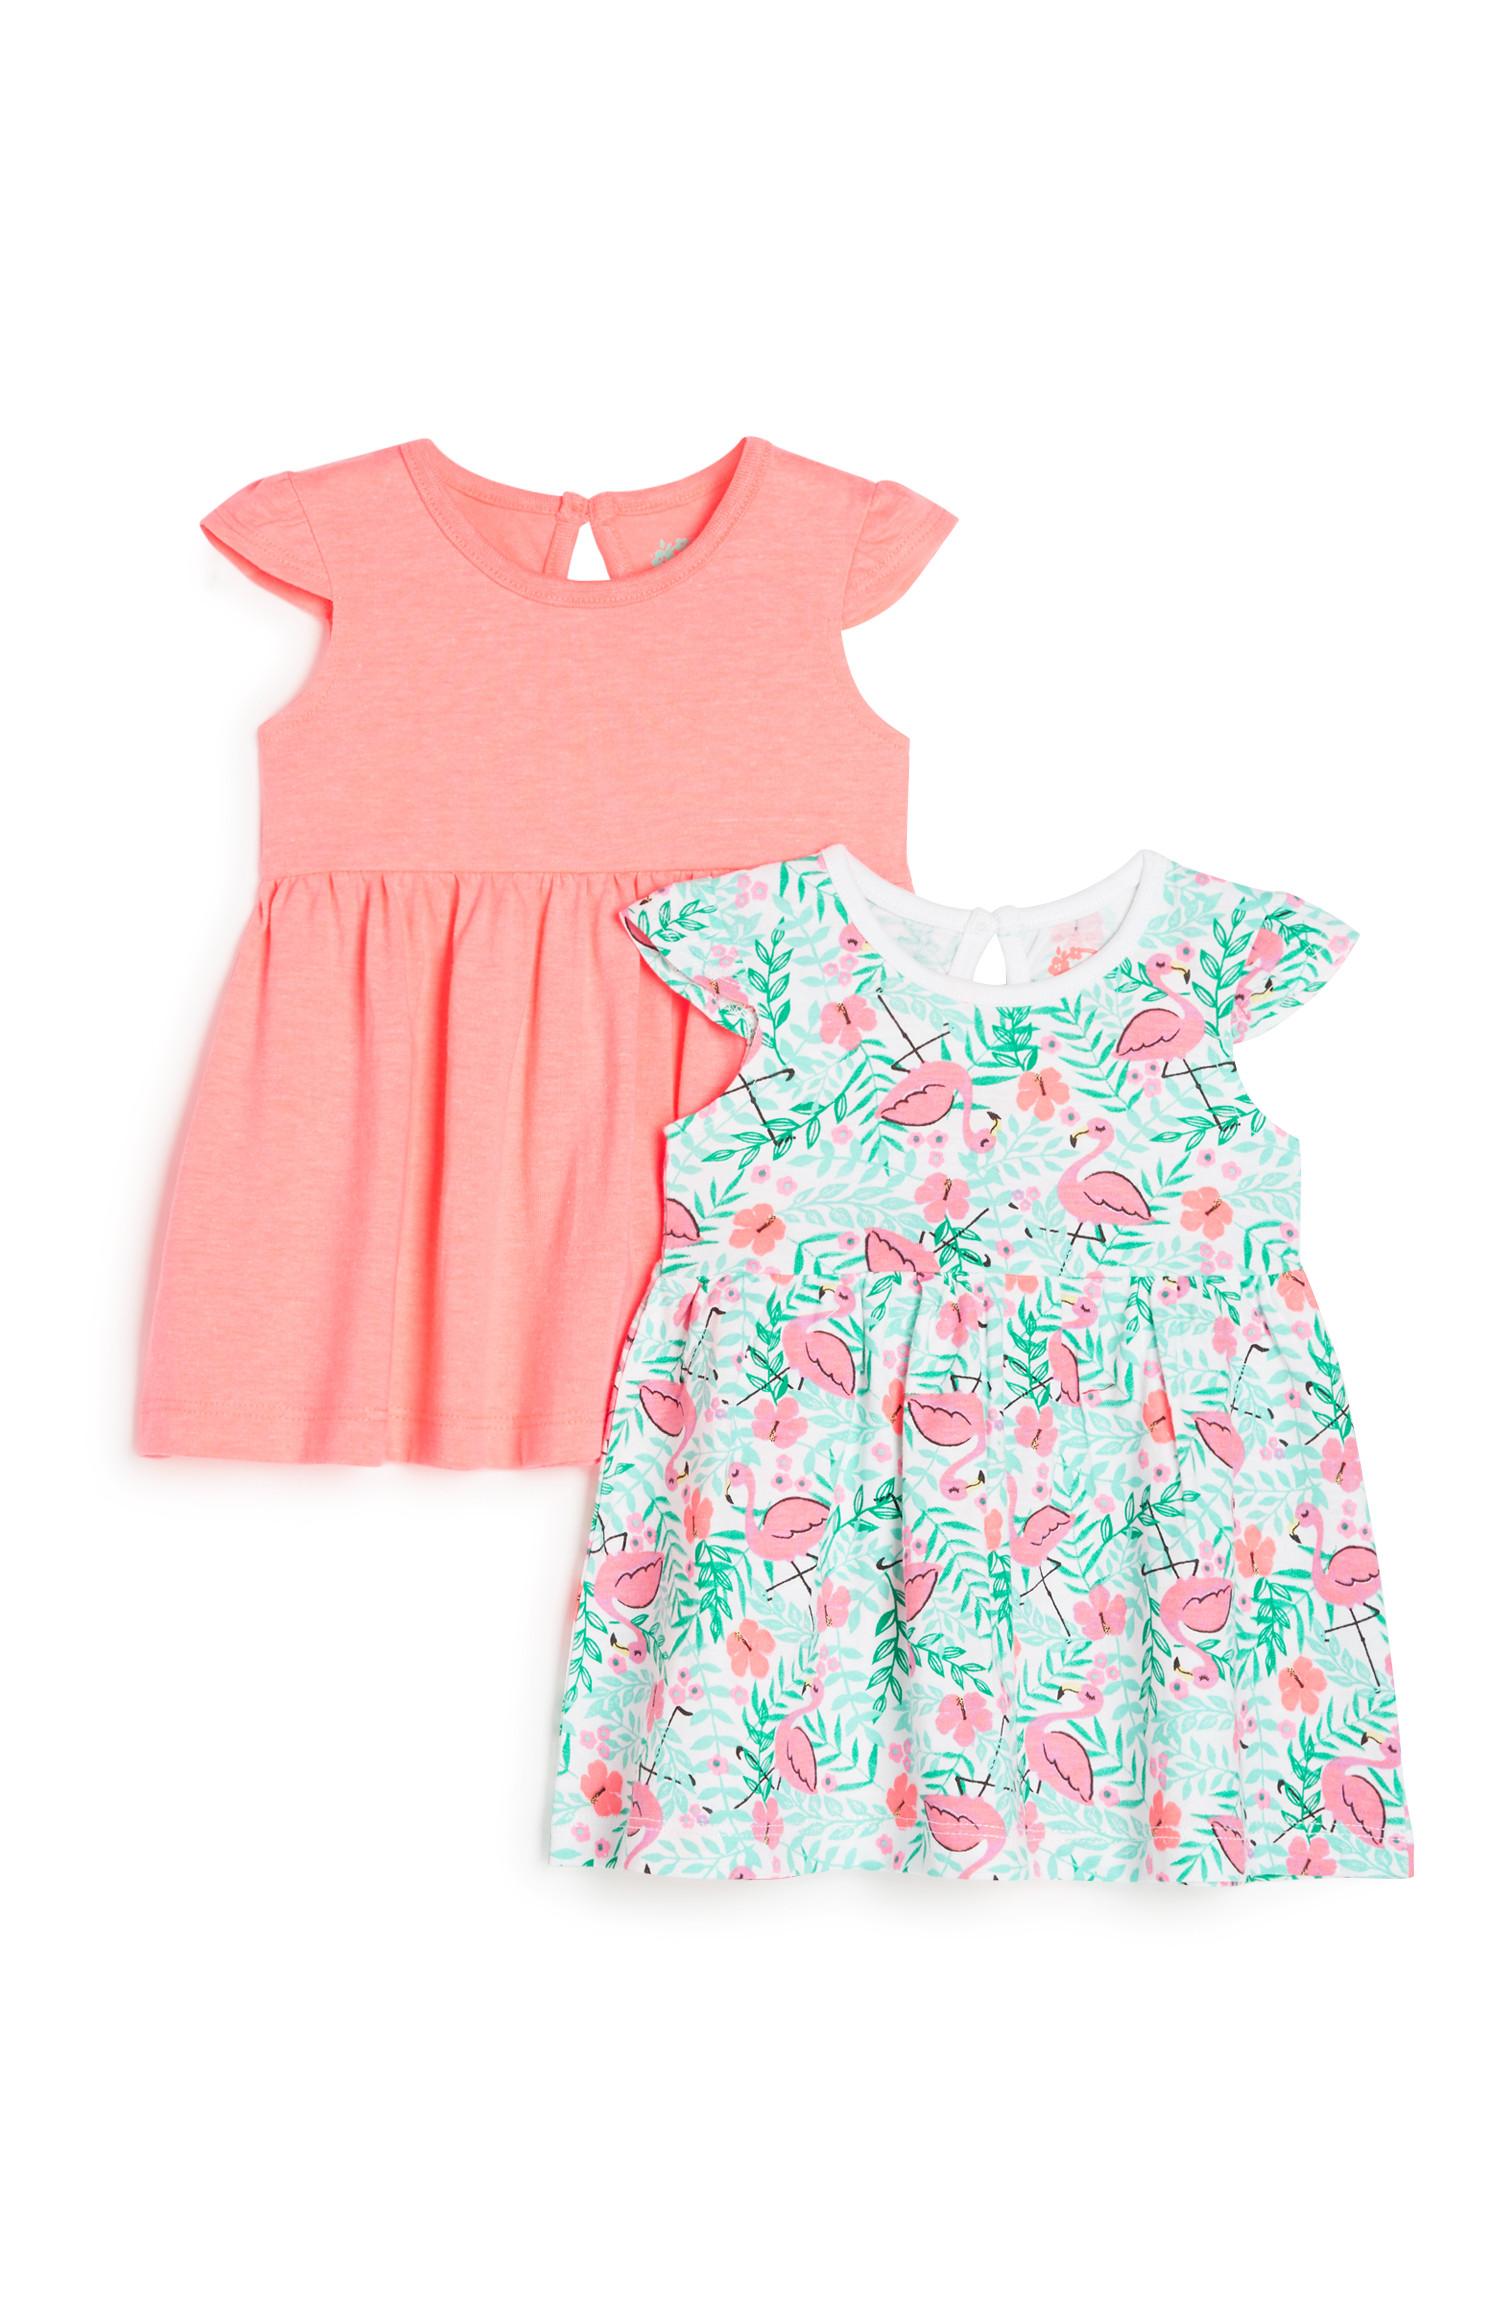 primark clothes for baby girl